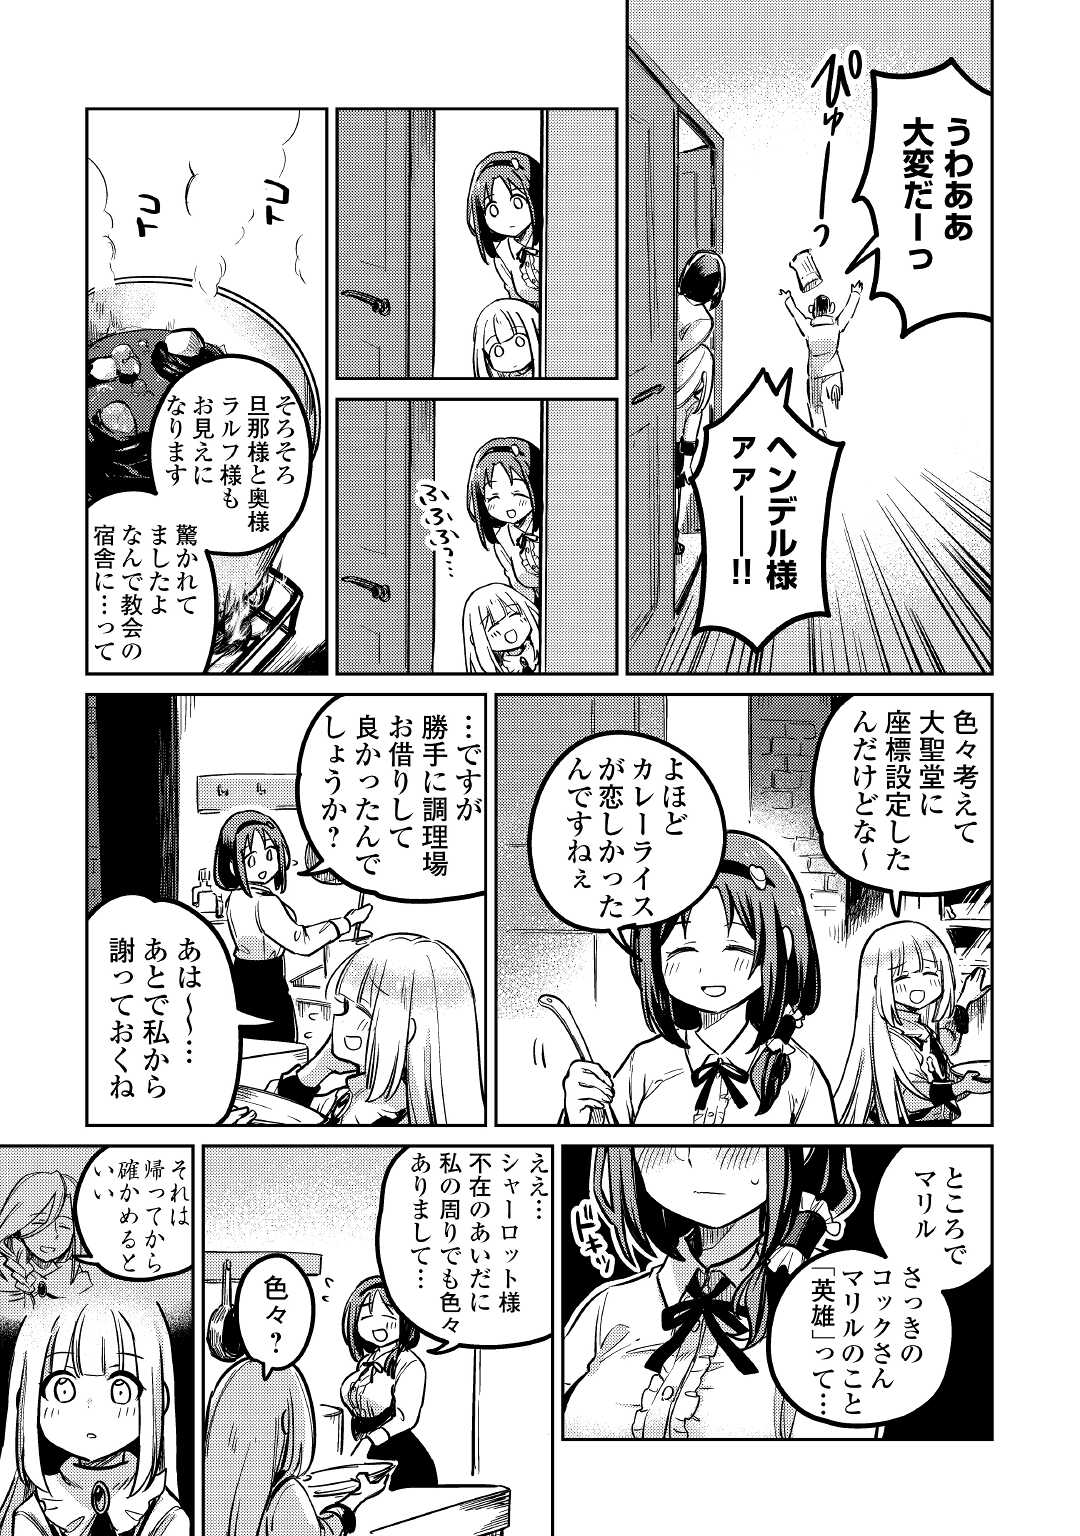 The Former Structural Researcher’s Story of Otherworldly Adventure 第41話 - Page 33